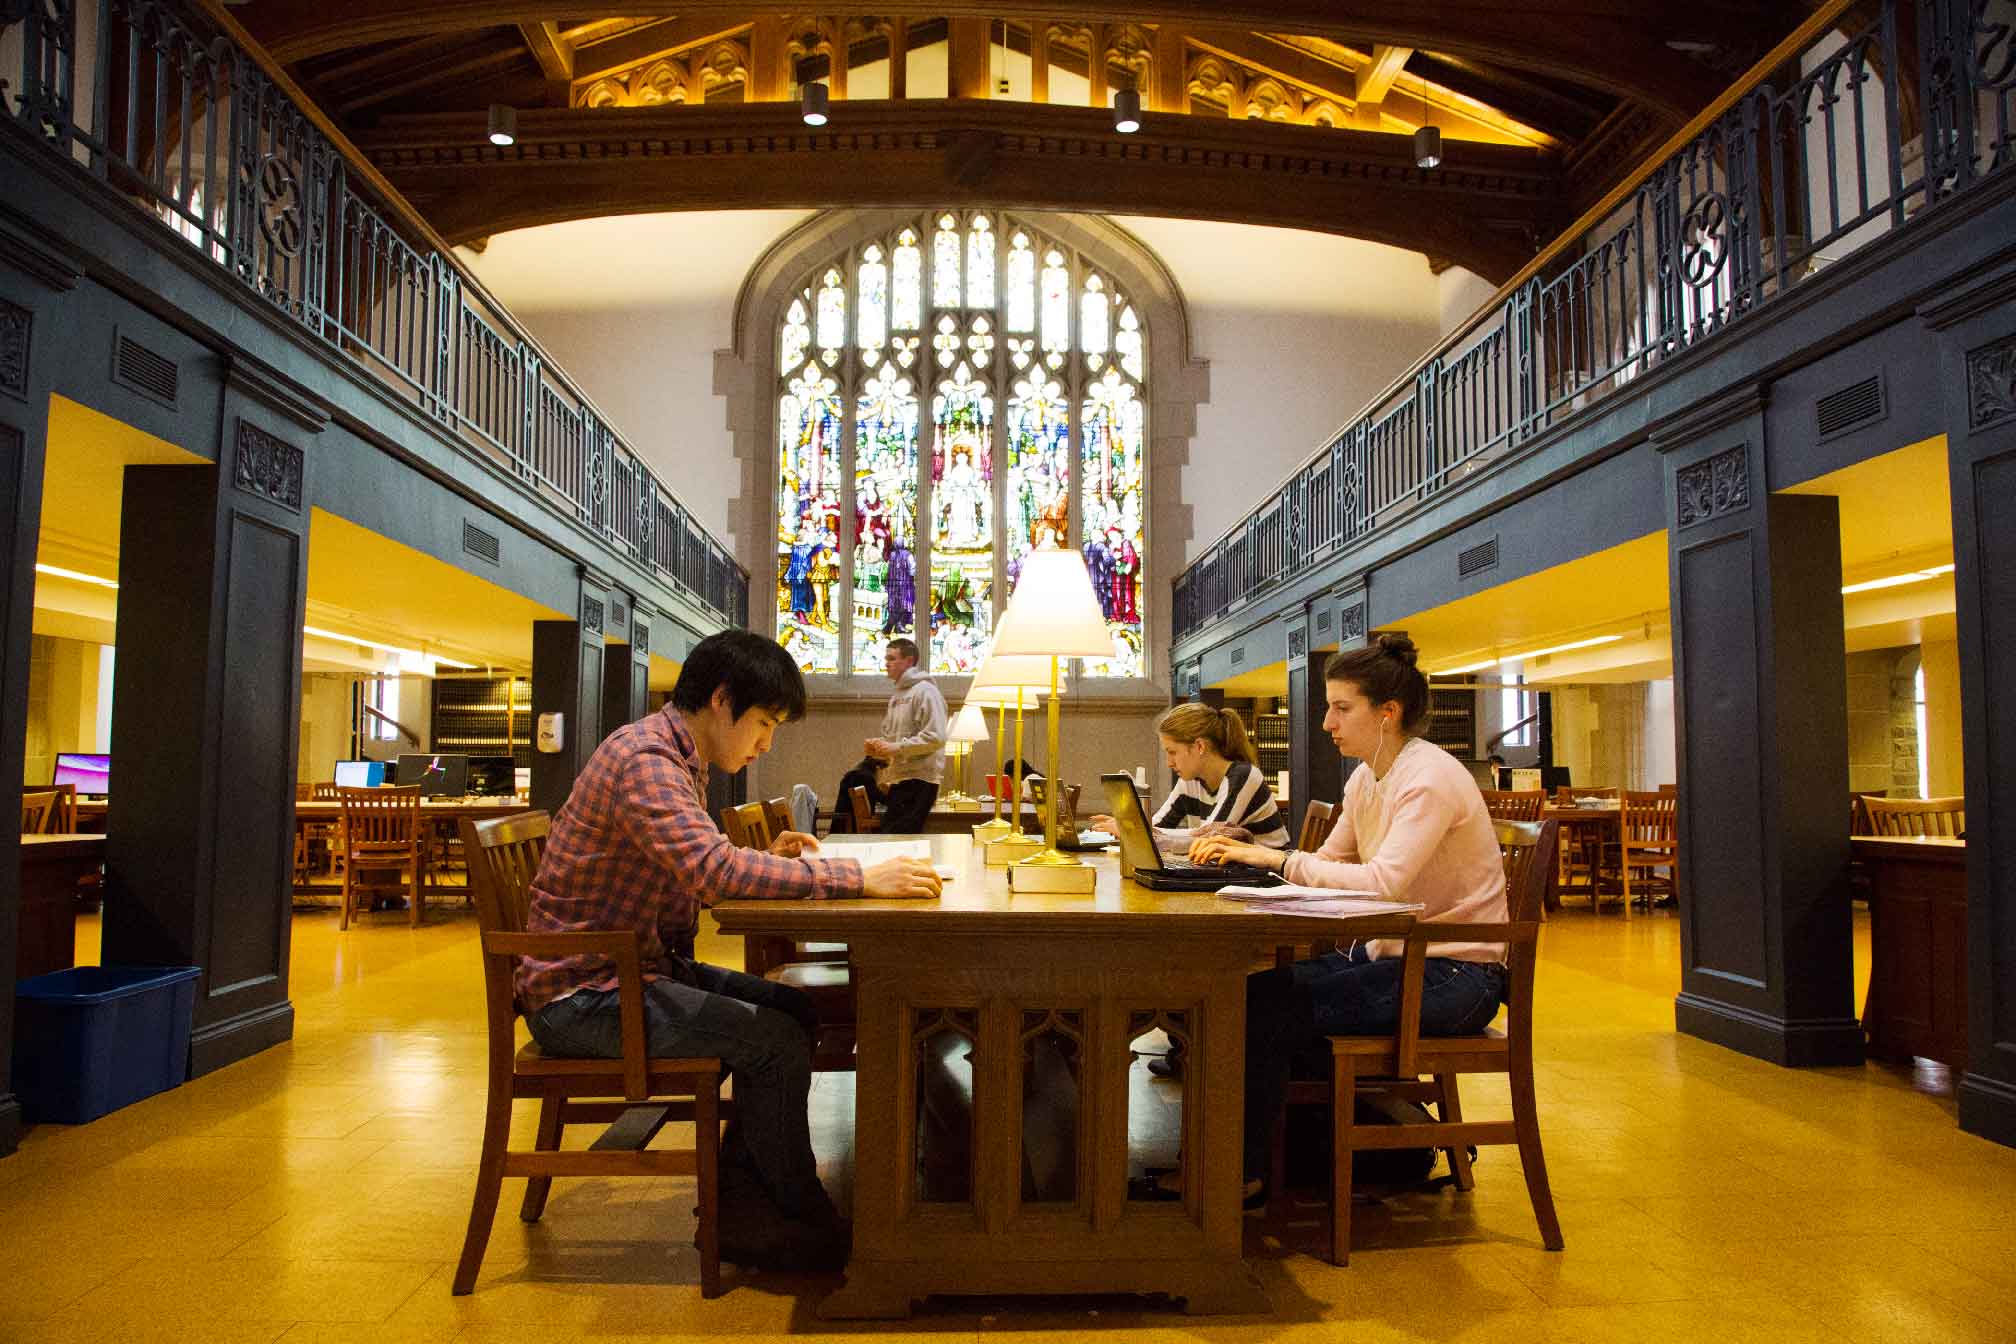 Image of students studying at a table in the library